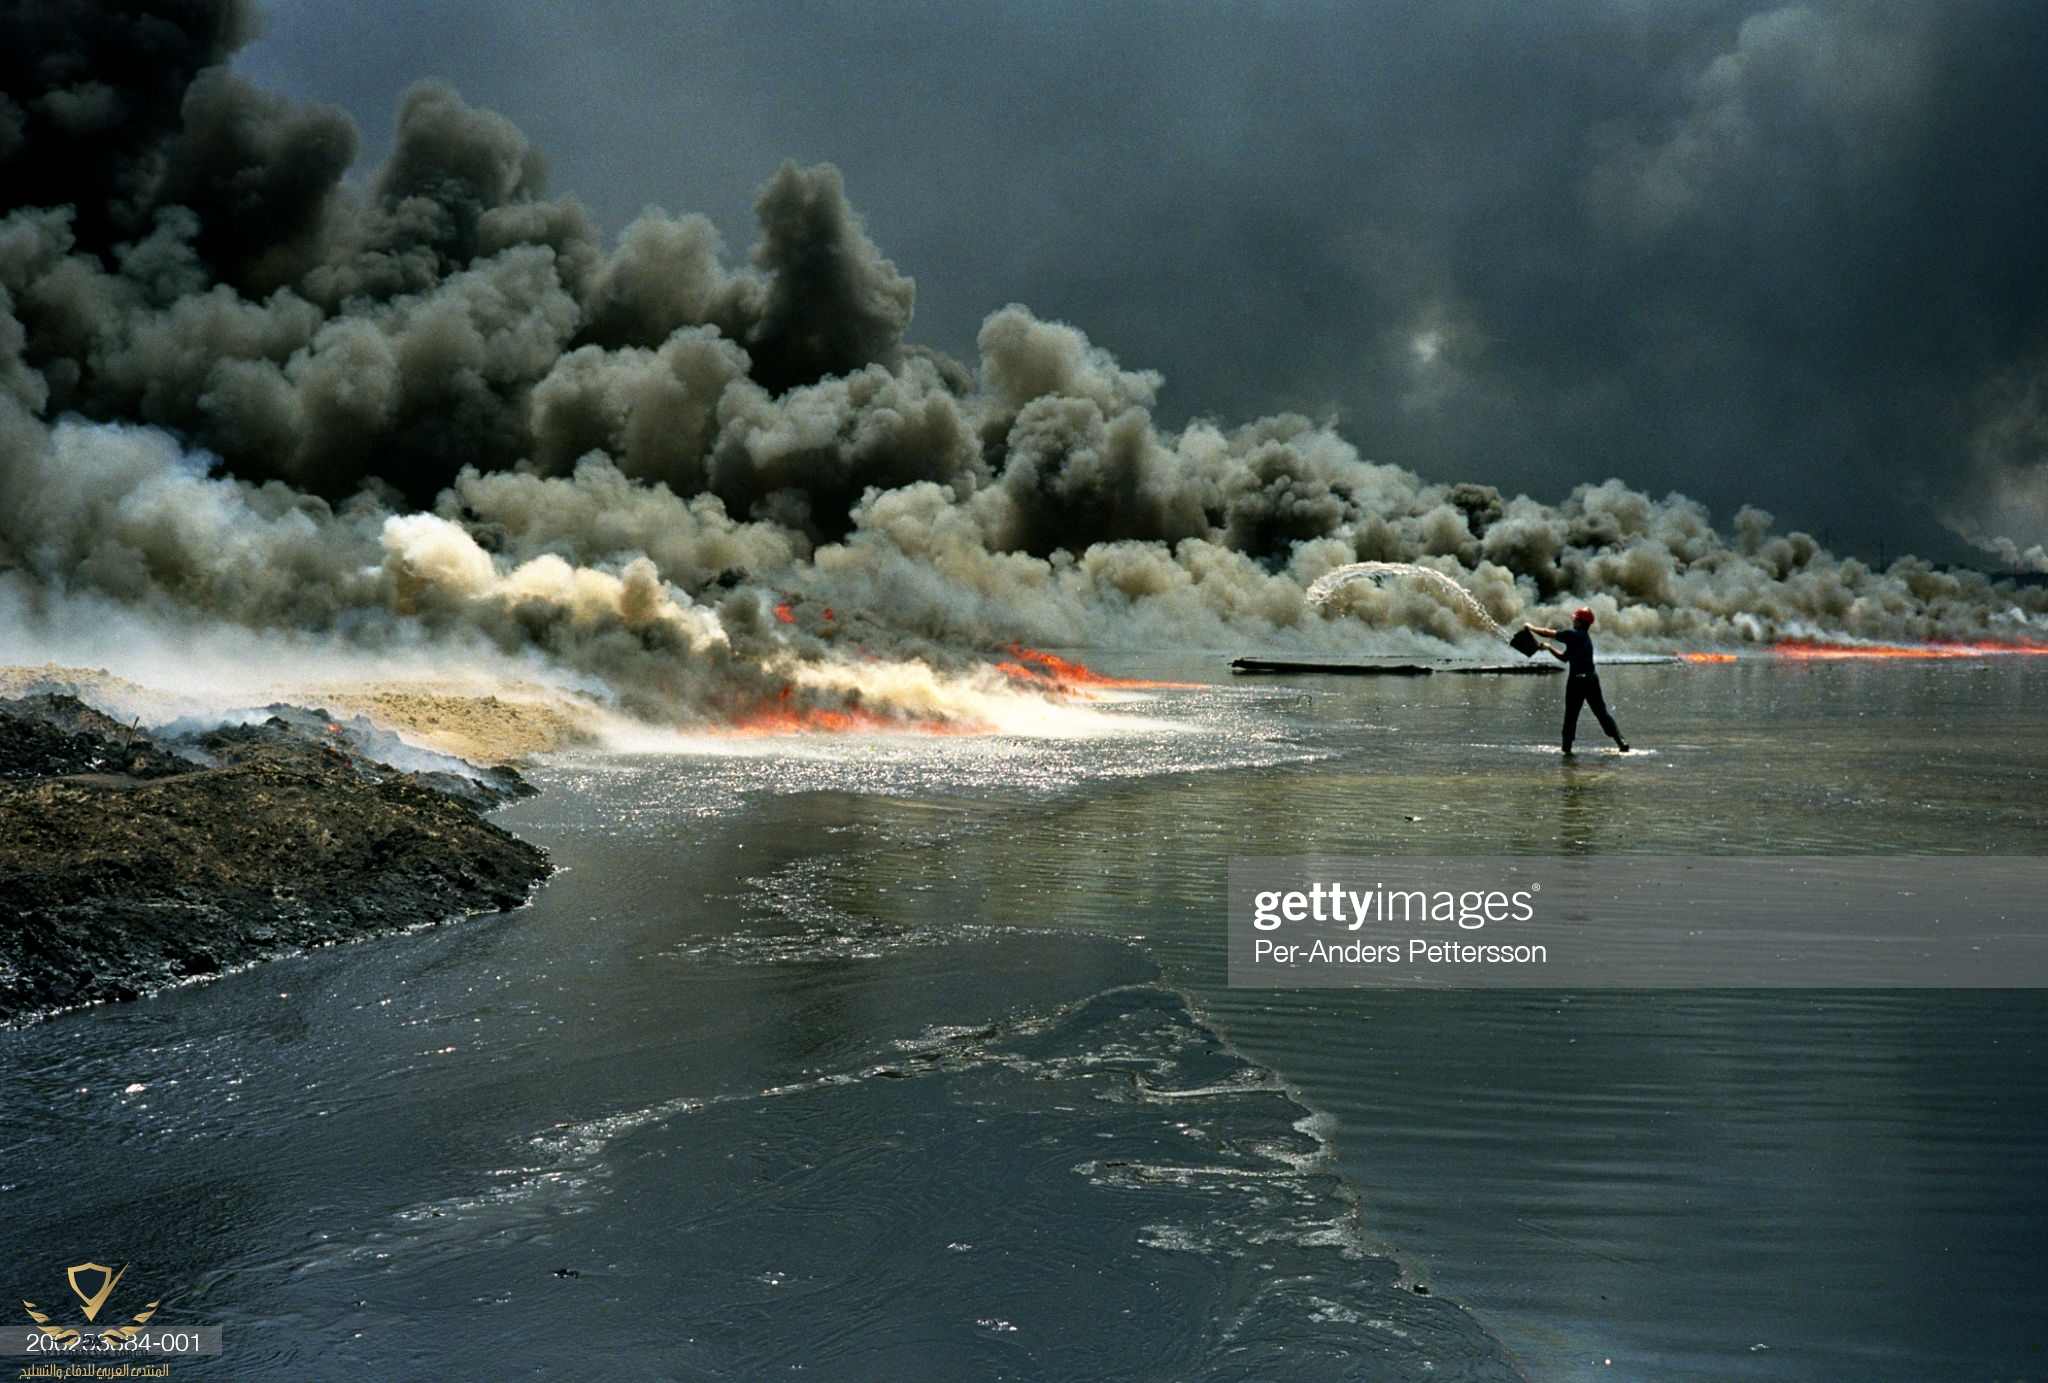 gettyimages-200253384-001-2048x2048.jpg